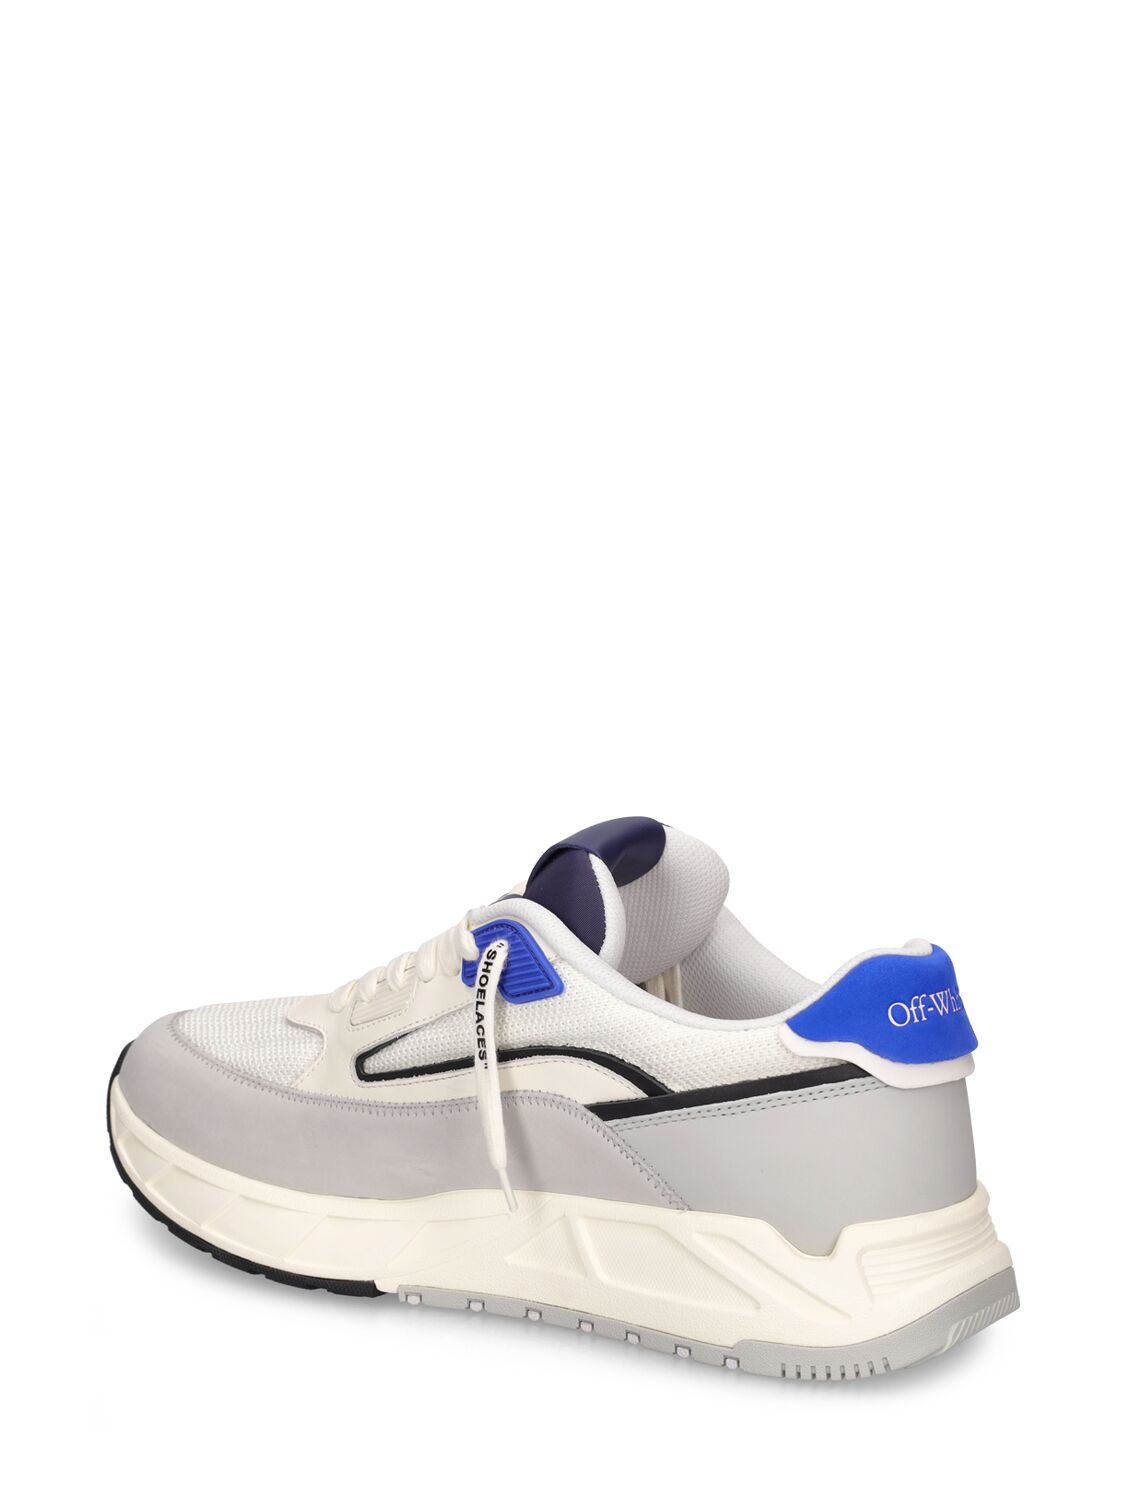 Shop Off-white Kick Off Leather Sneakers In White,blue